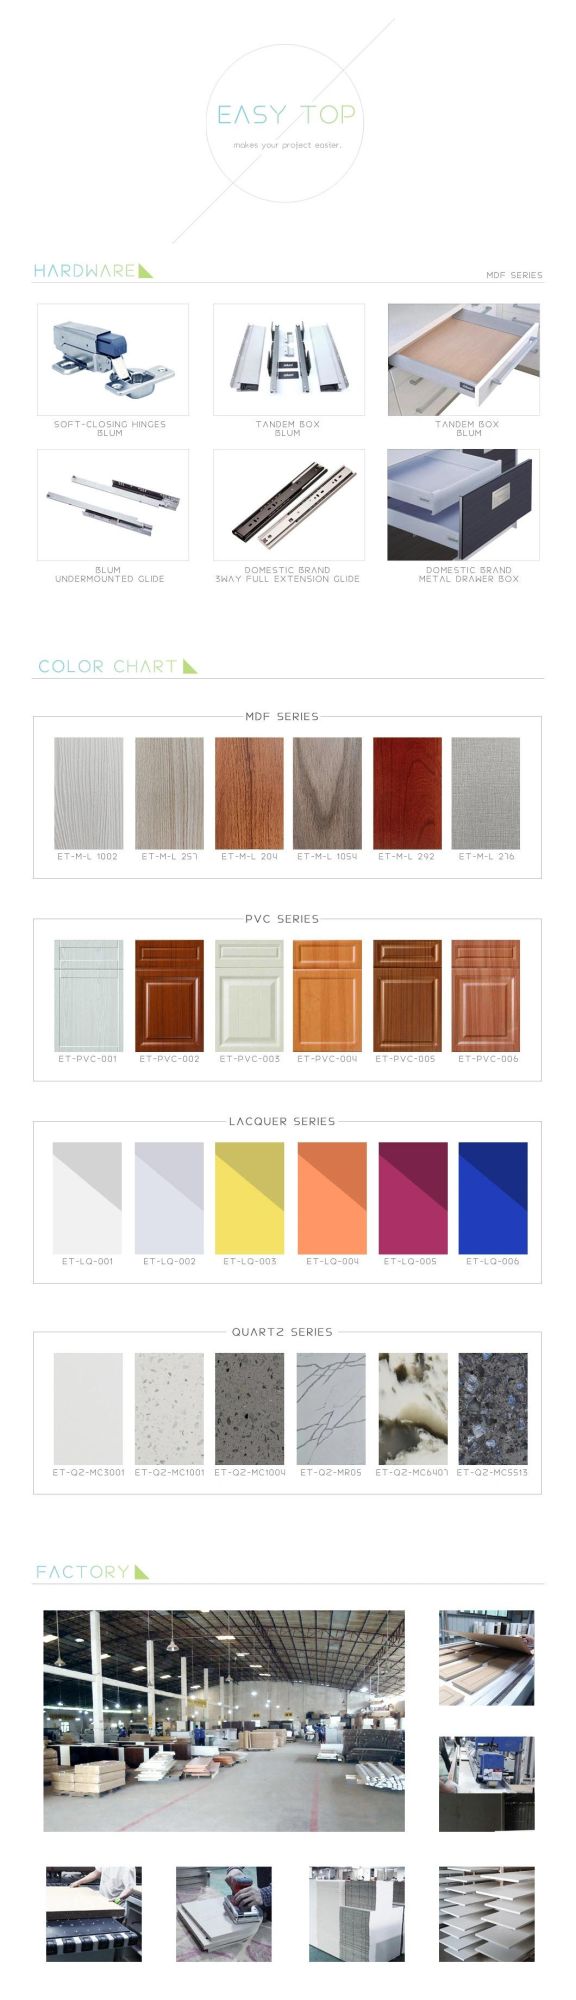 Apartment Project Laminate Commercial Laminate Kitchen Wooden Cabinet